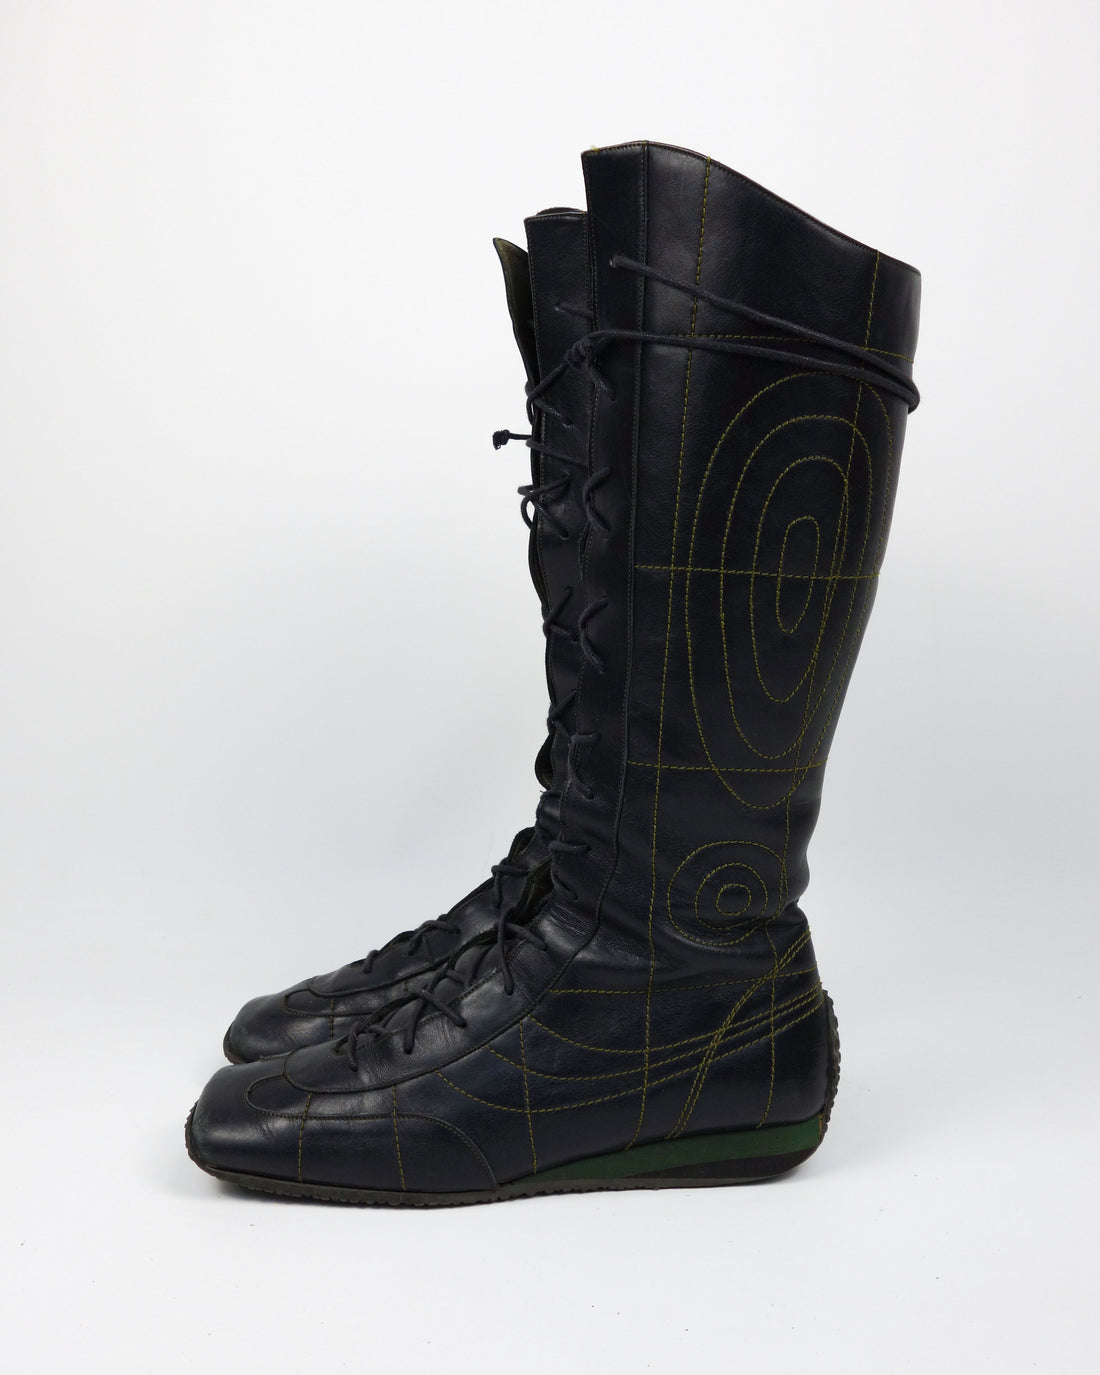 Muxart Black and Green Stitched Black Leather Boots 2000's